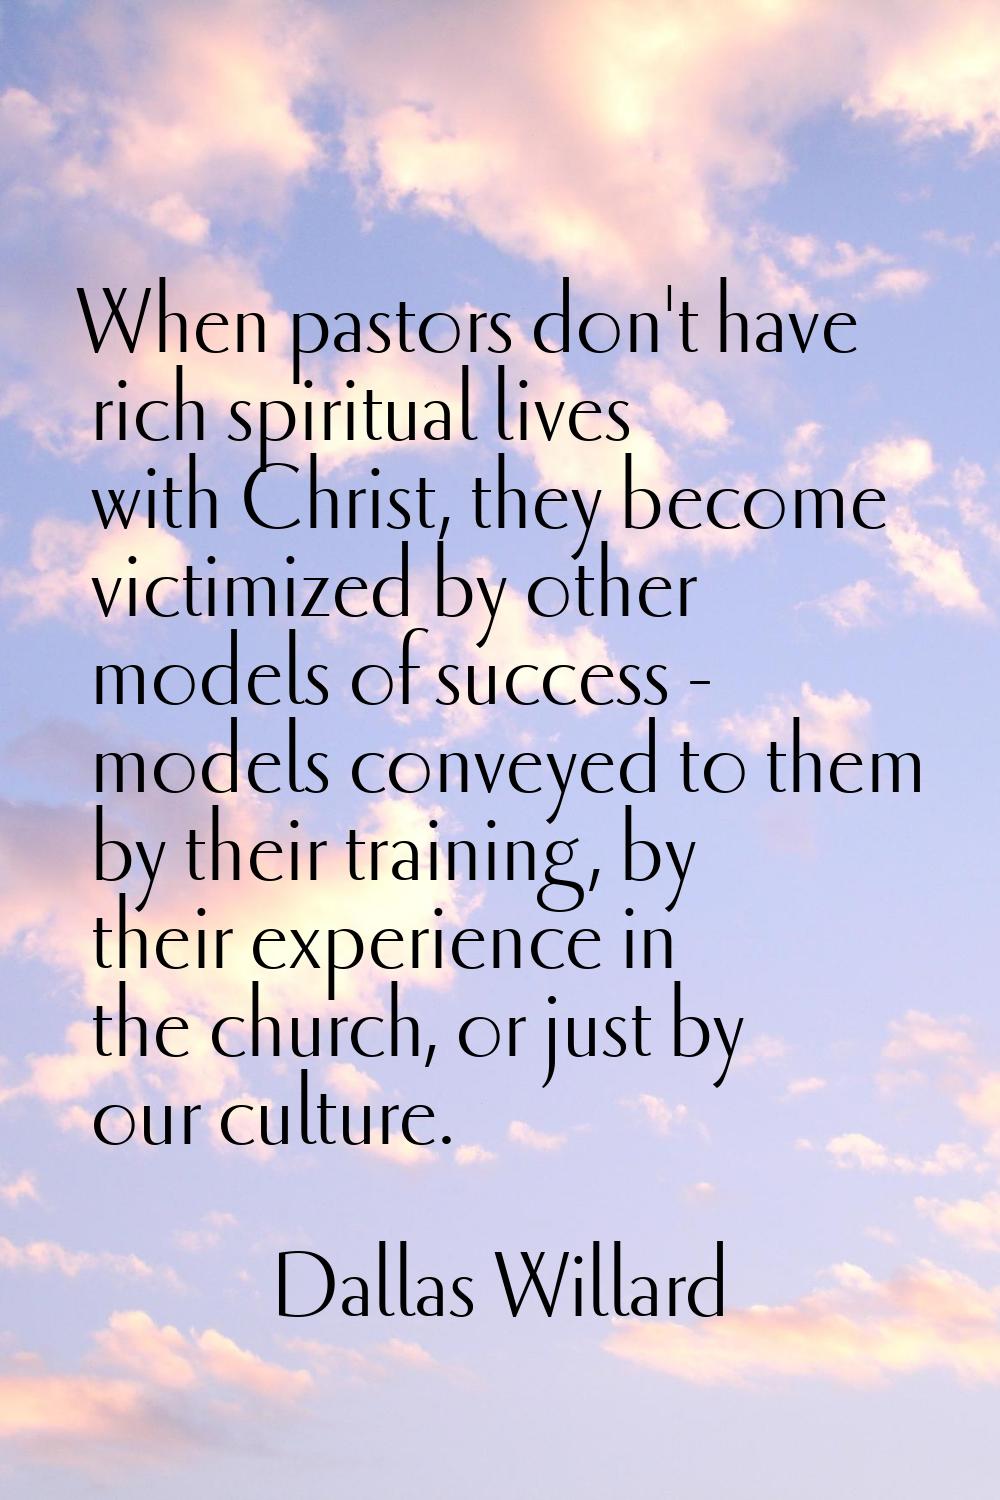 When pastors don't have rich spiritual lives with Christ, they become victimized by other models of